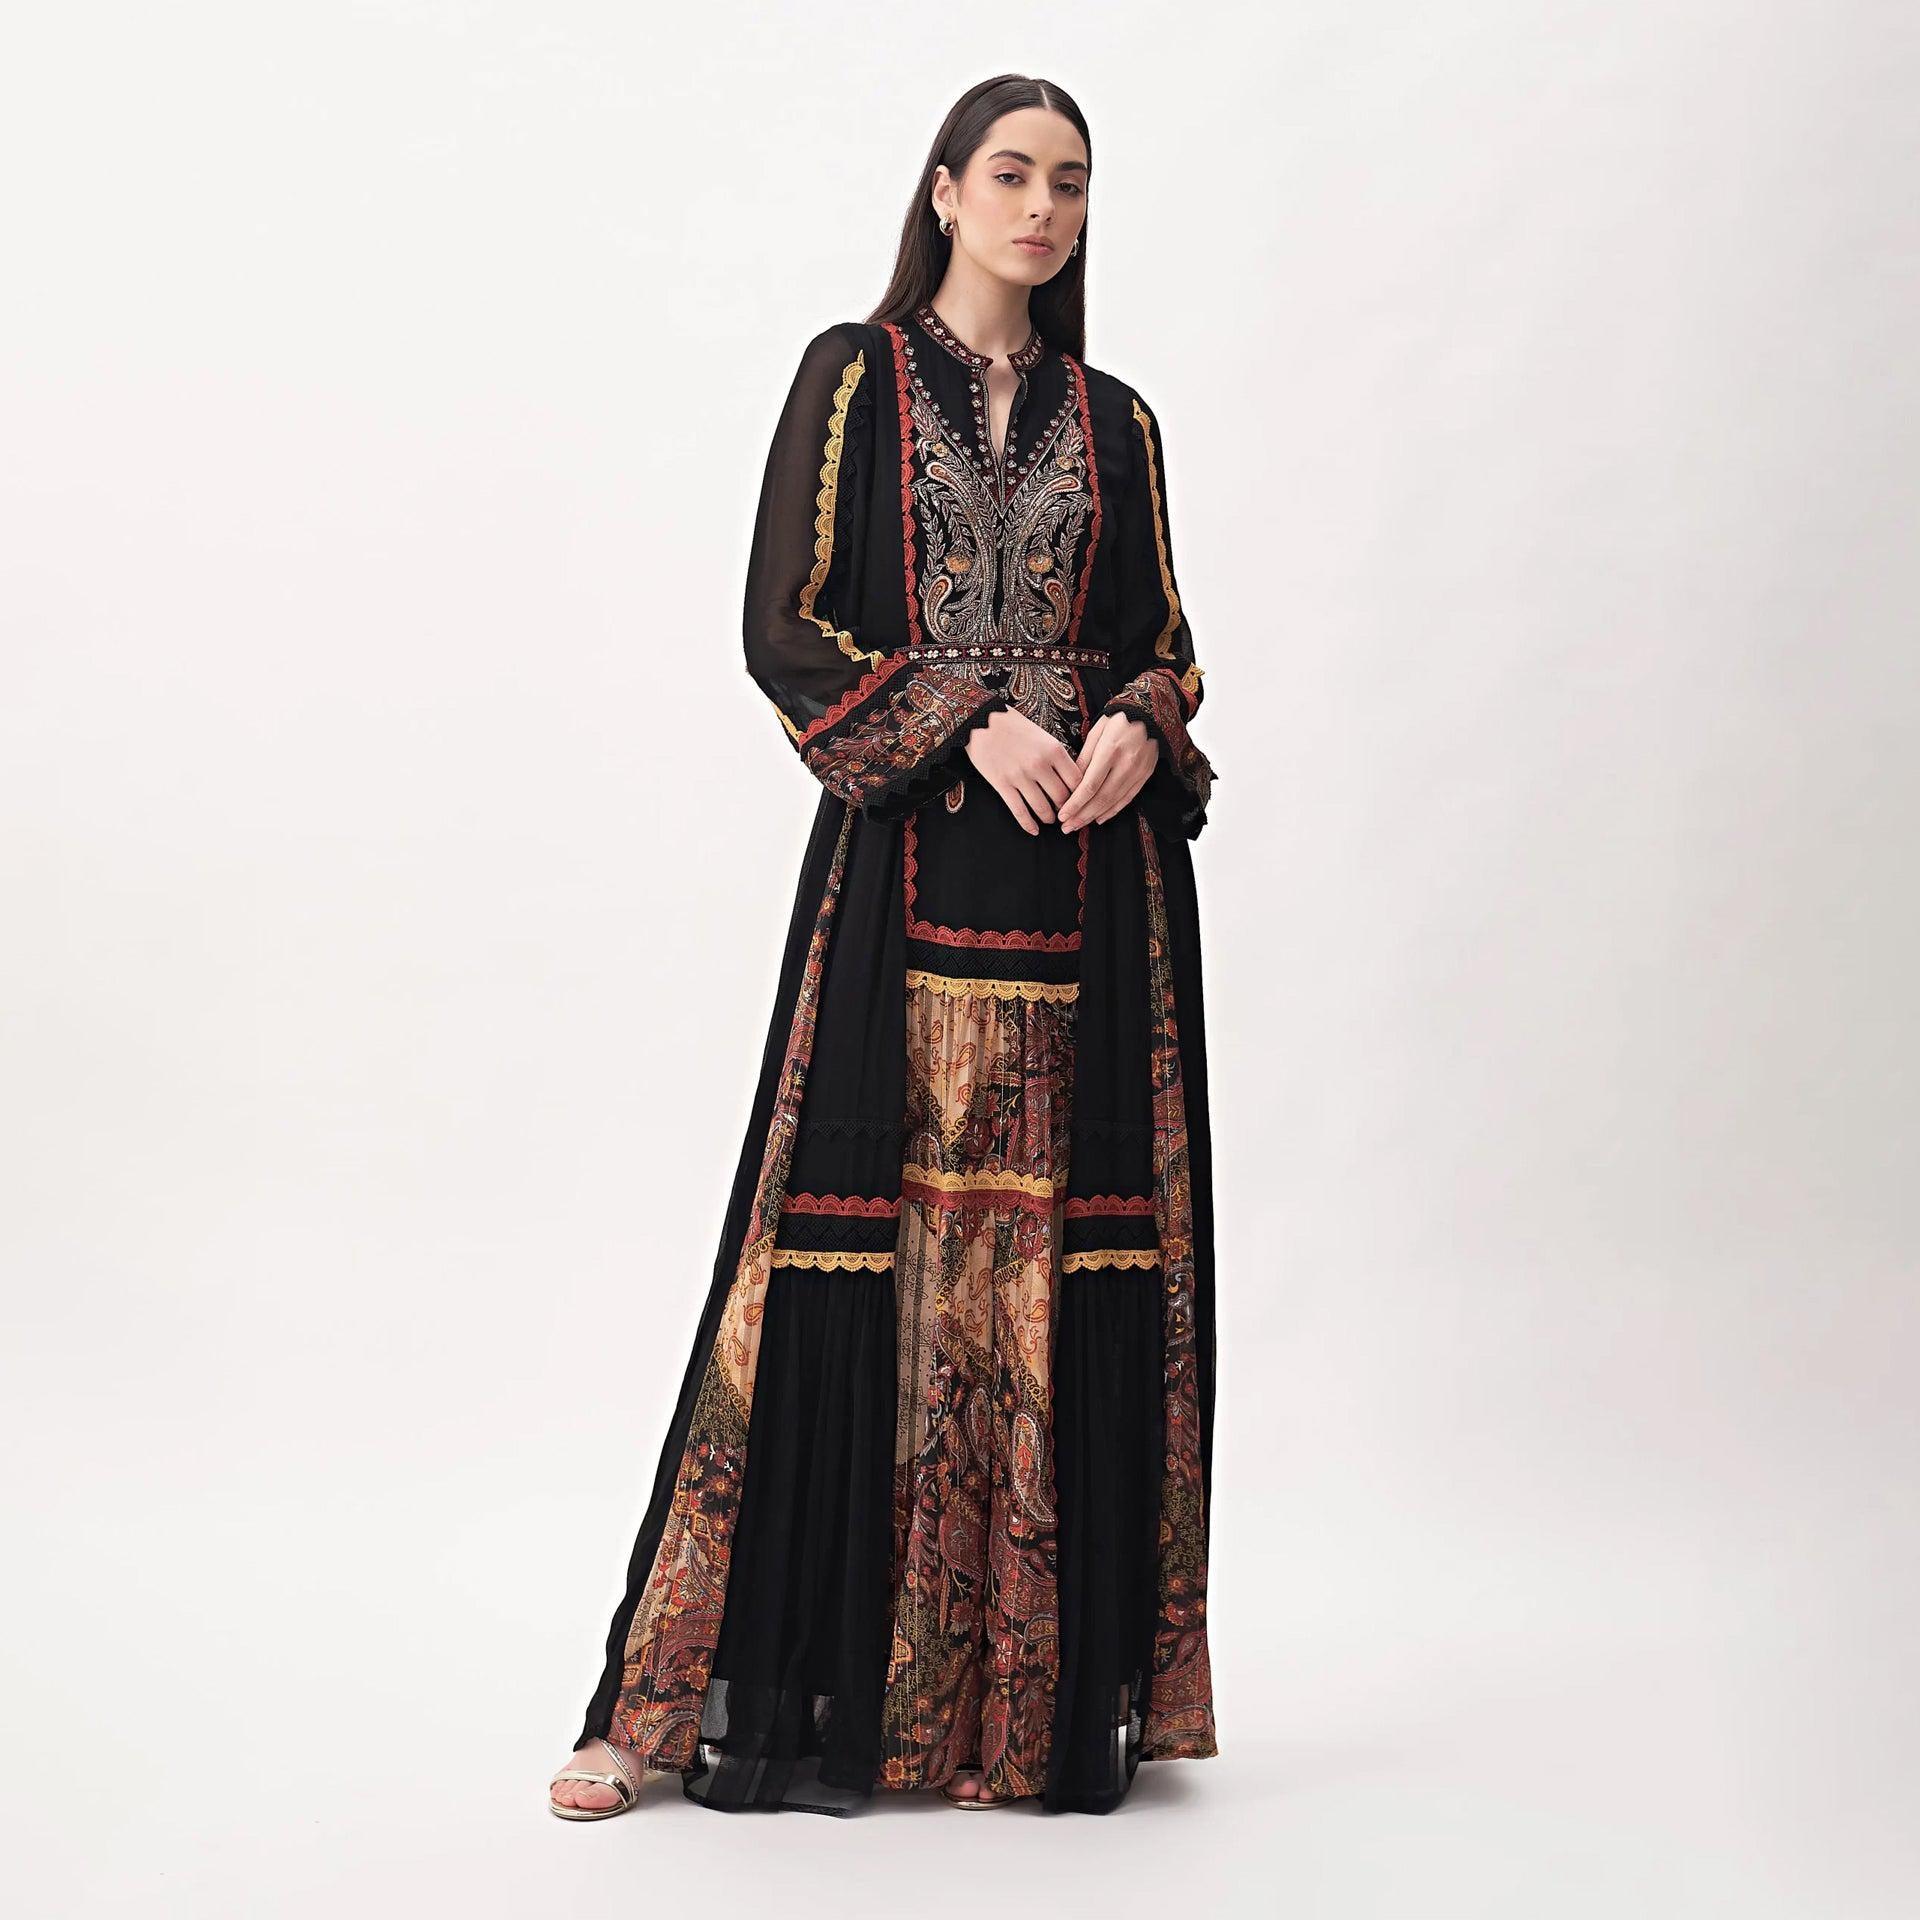 Black Embroidery Eozal Dress with Long Sleeves And Mixed Material From Shalky - WECRE8